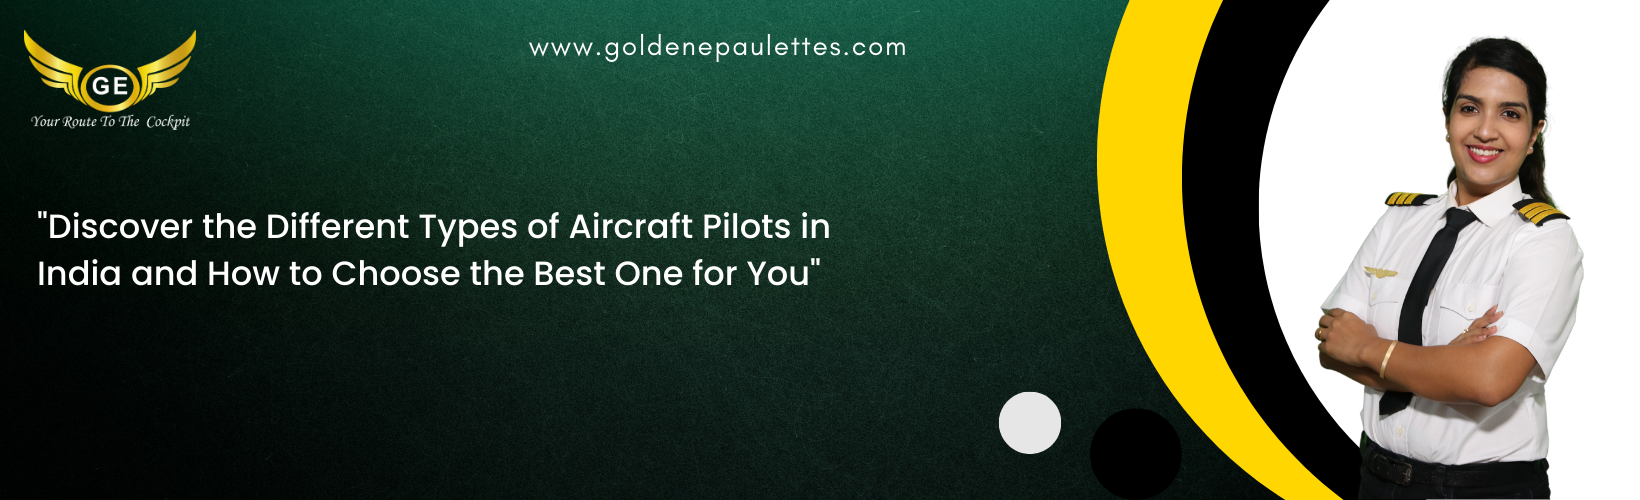 Types of Aircraft Pilots in India